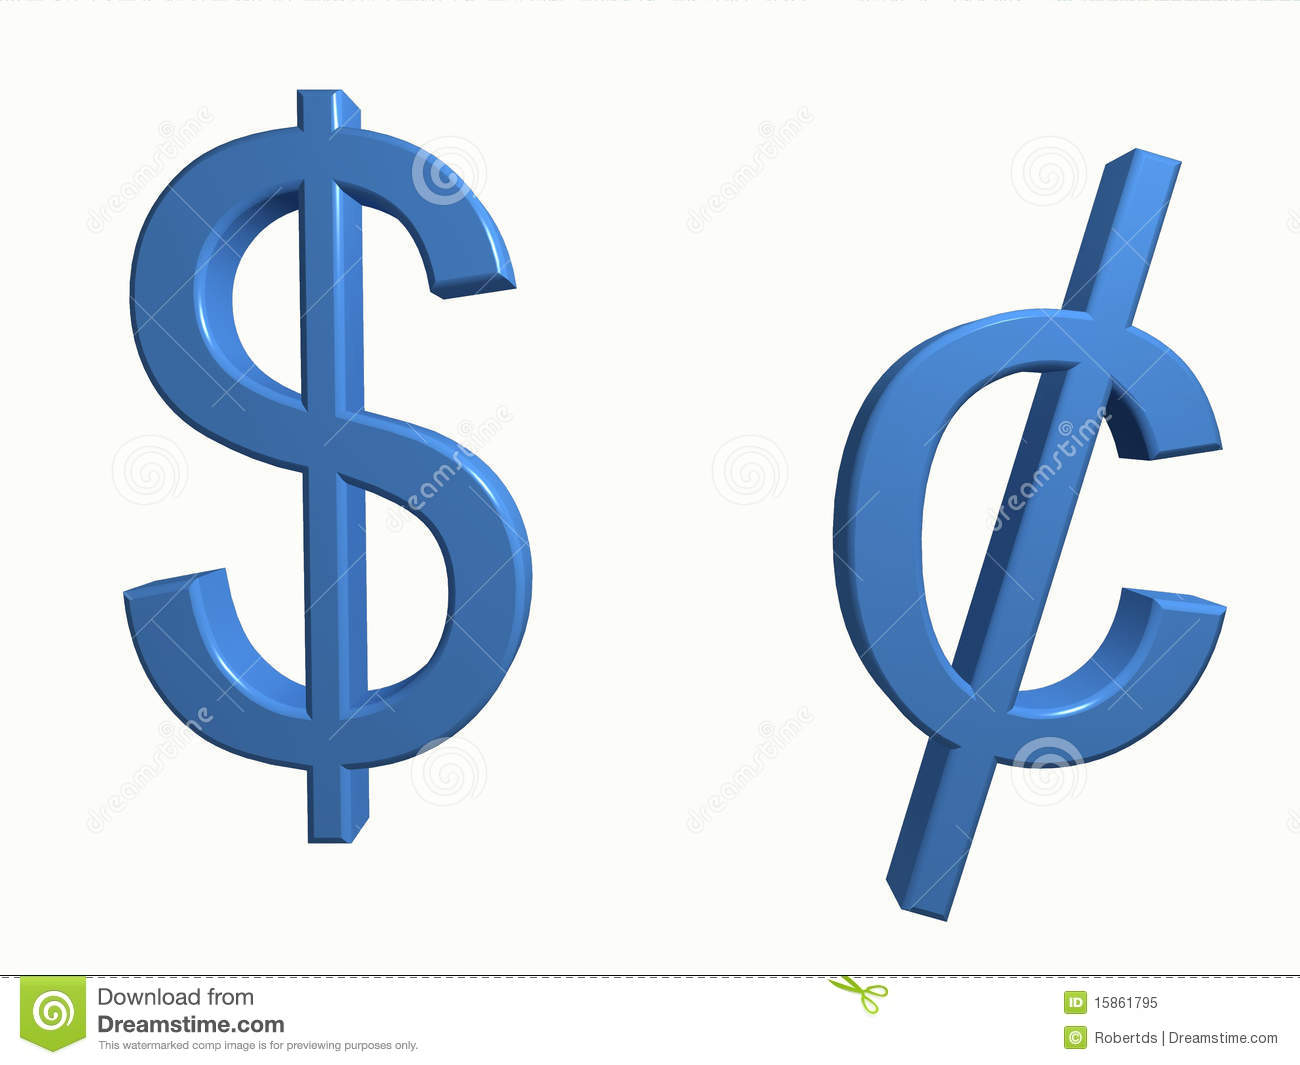 3d Symbols For Dollar And Cent Isolated On White  Computer Render